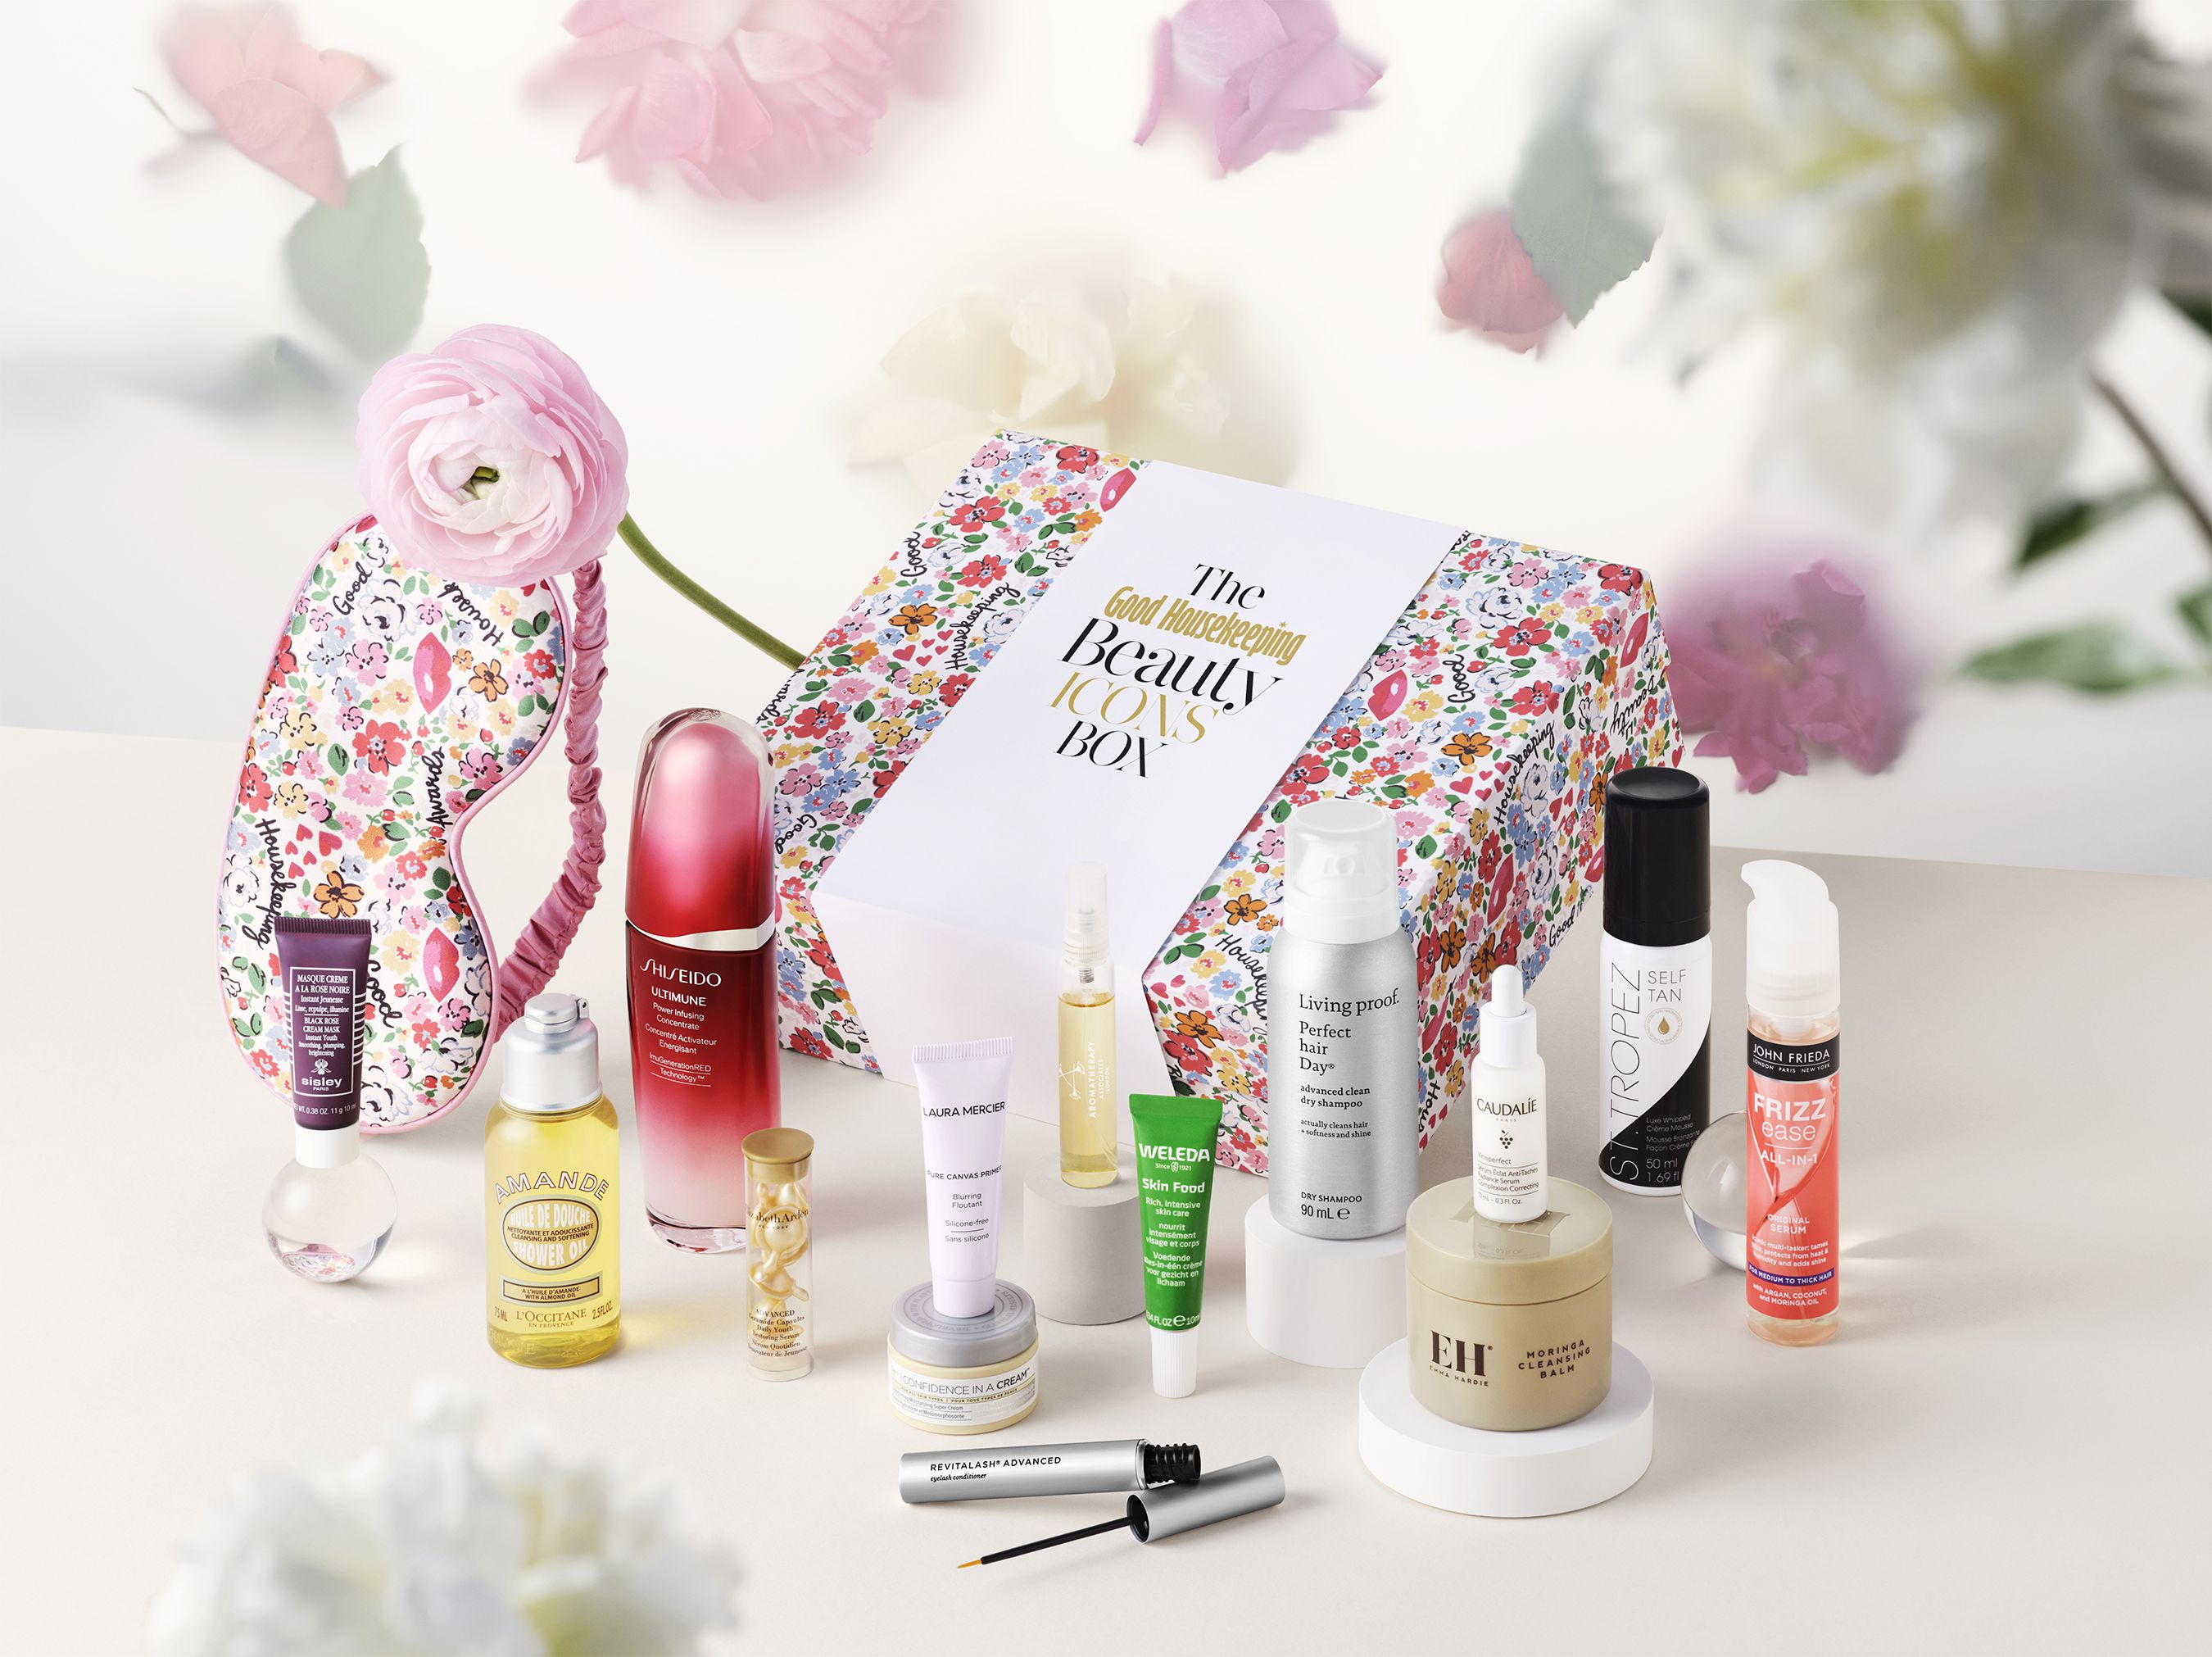 78 Good Housekeeping Beauty Icons box is worth a whopping £428